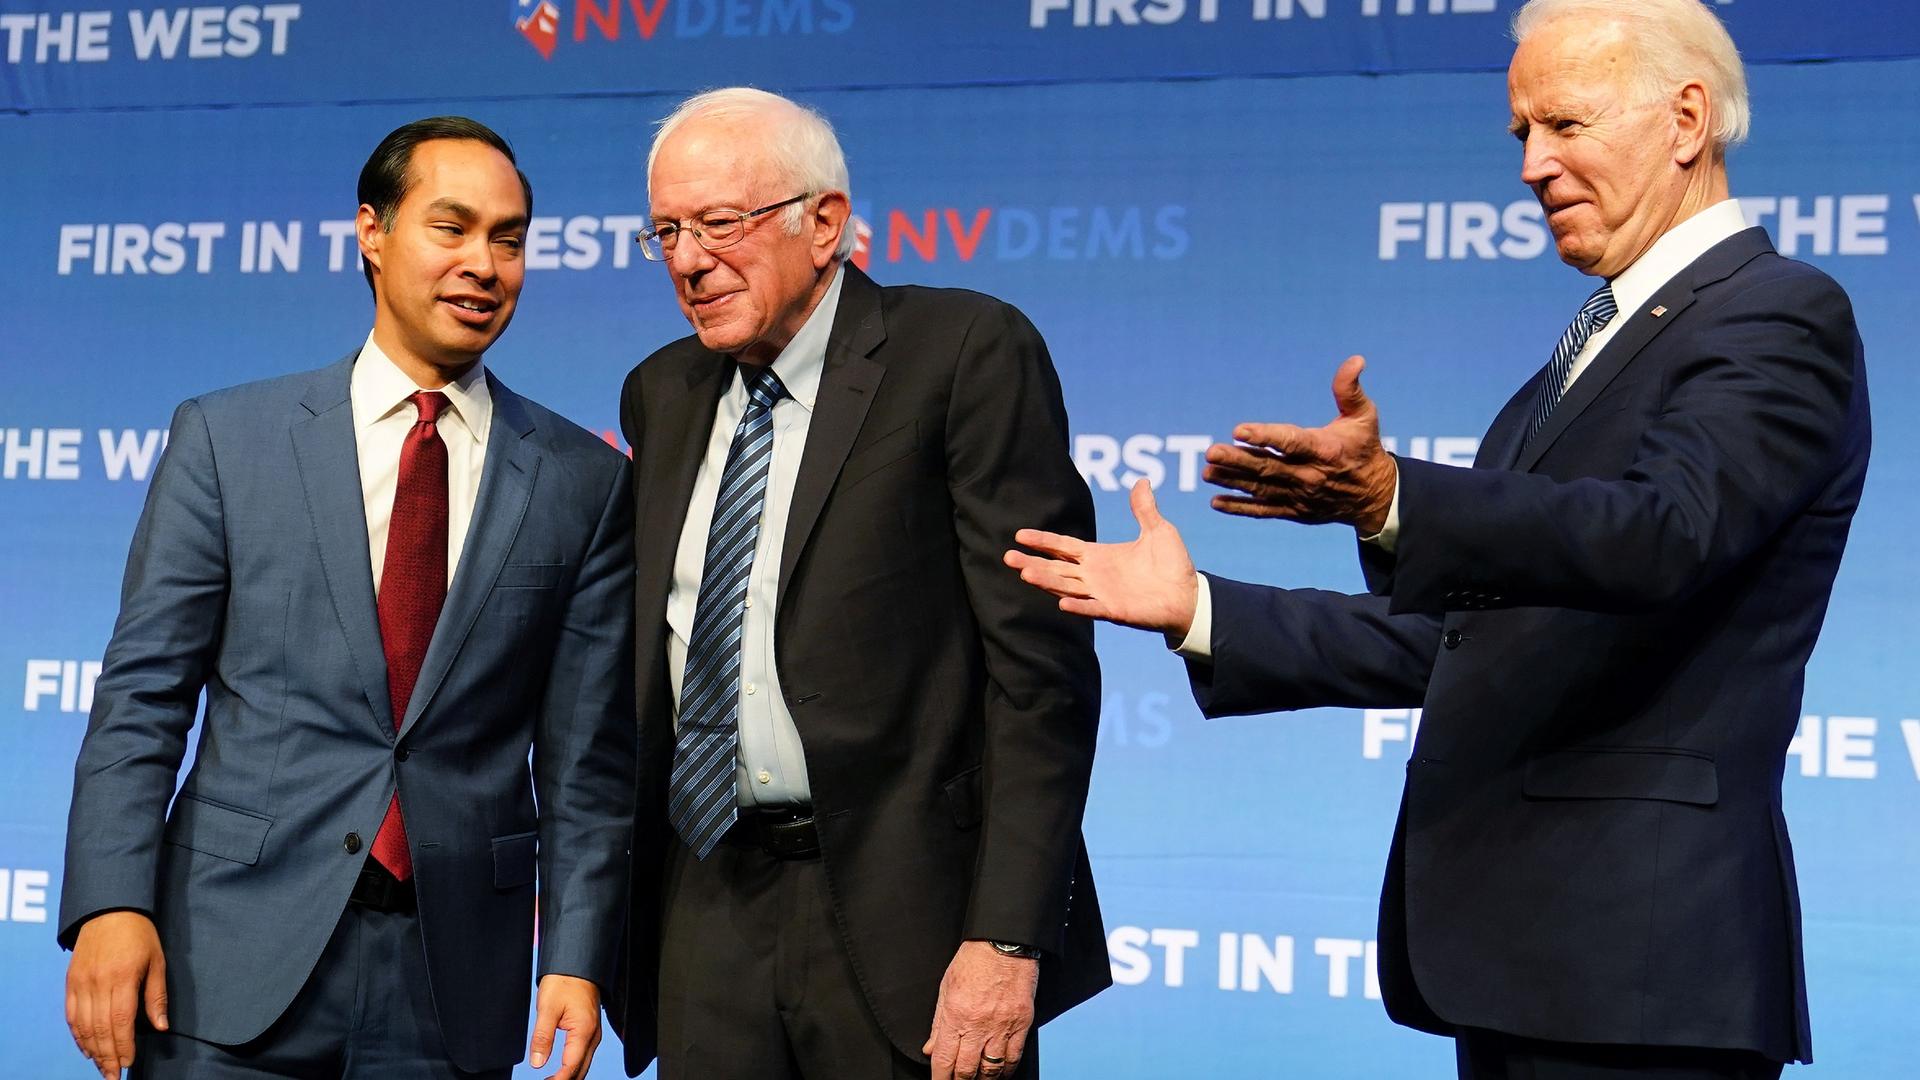 In this file photo, Democratic US presidential candidates Julian Castro, Bernie Sanders and Joe Biden are pictured on stage at a First in the West Event at the Bellagio Hotel in Las Vegas, Nevada, Nov. 17, 2019.